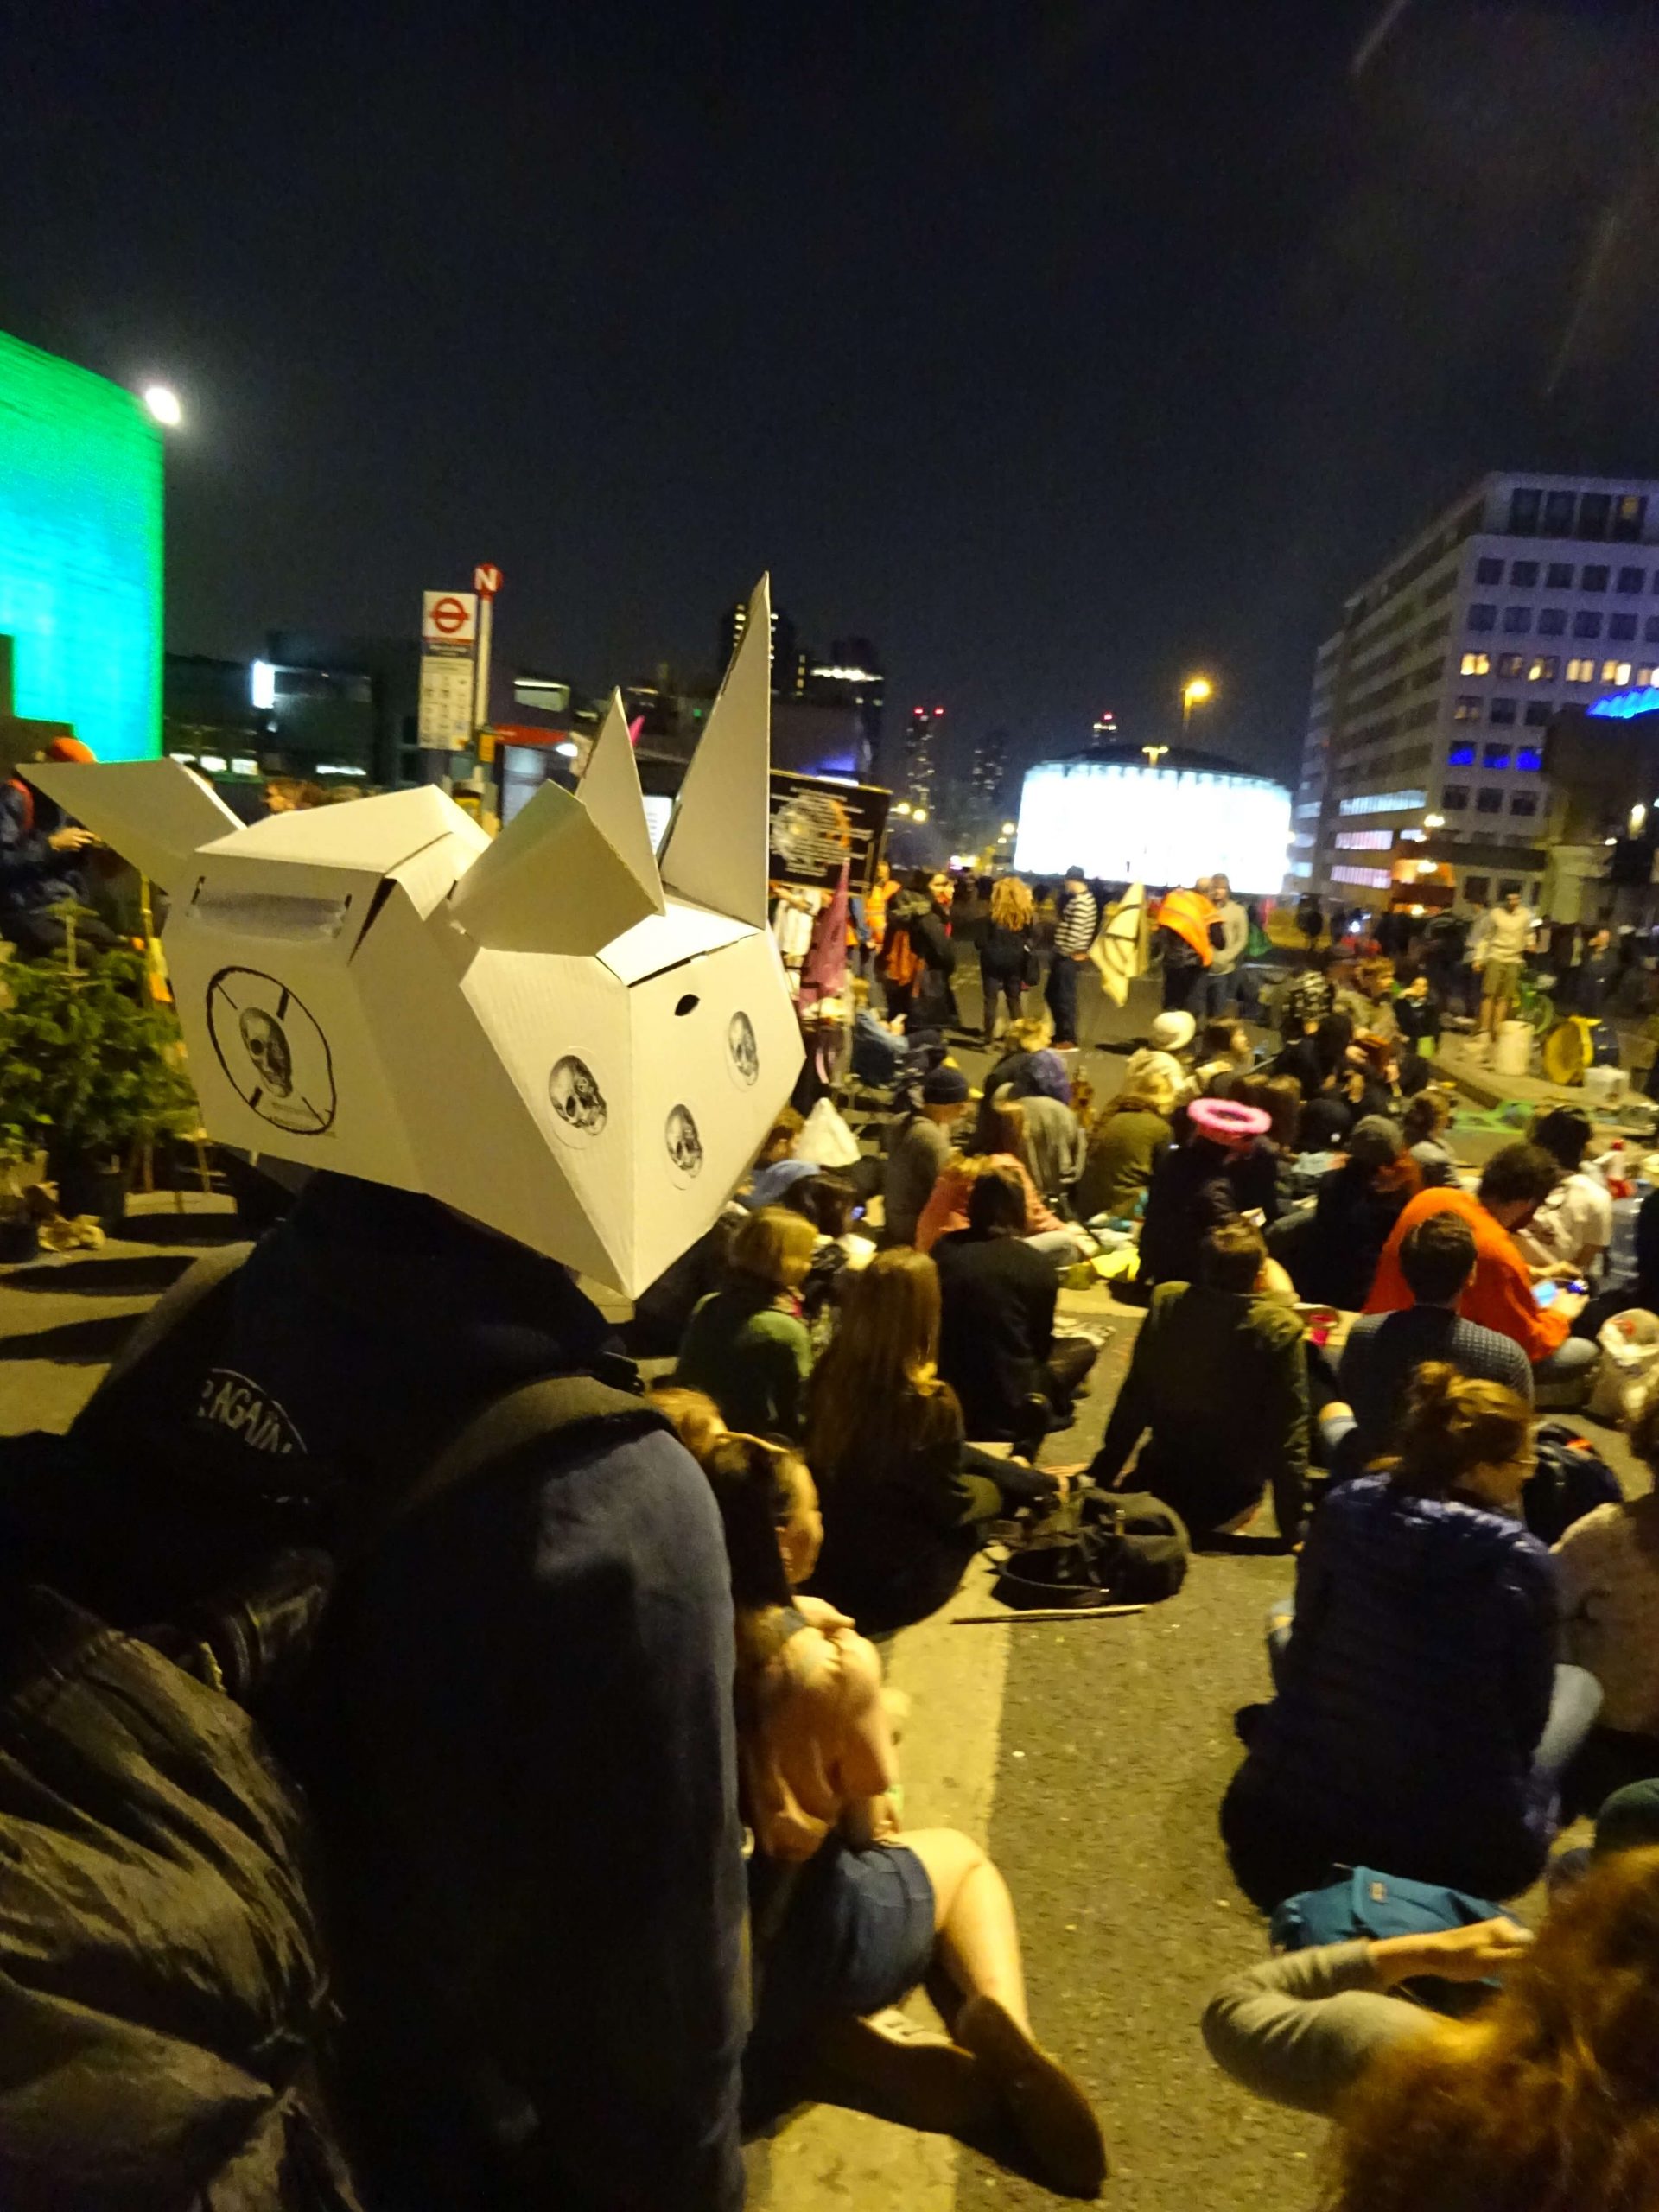 The back of a crowd at night in a city. Most are sitting on the ground. One person standing closest to the camera is wearing a 3D rhino mask made of cardboard, which they've decorated with skulls.